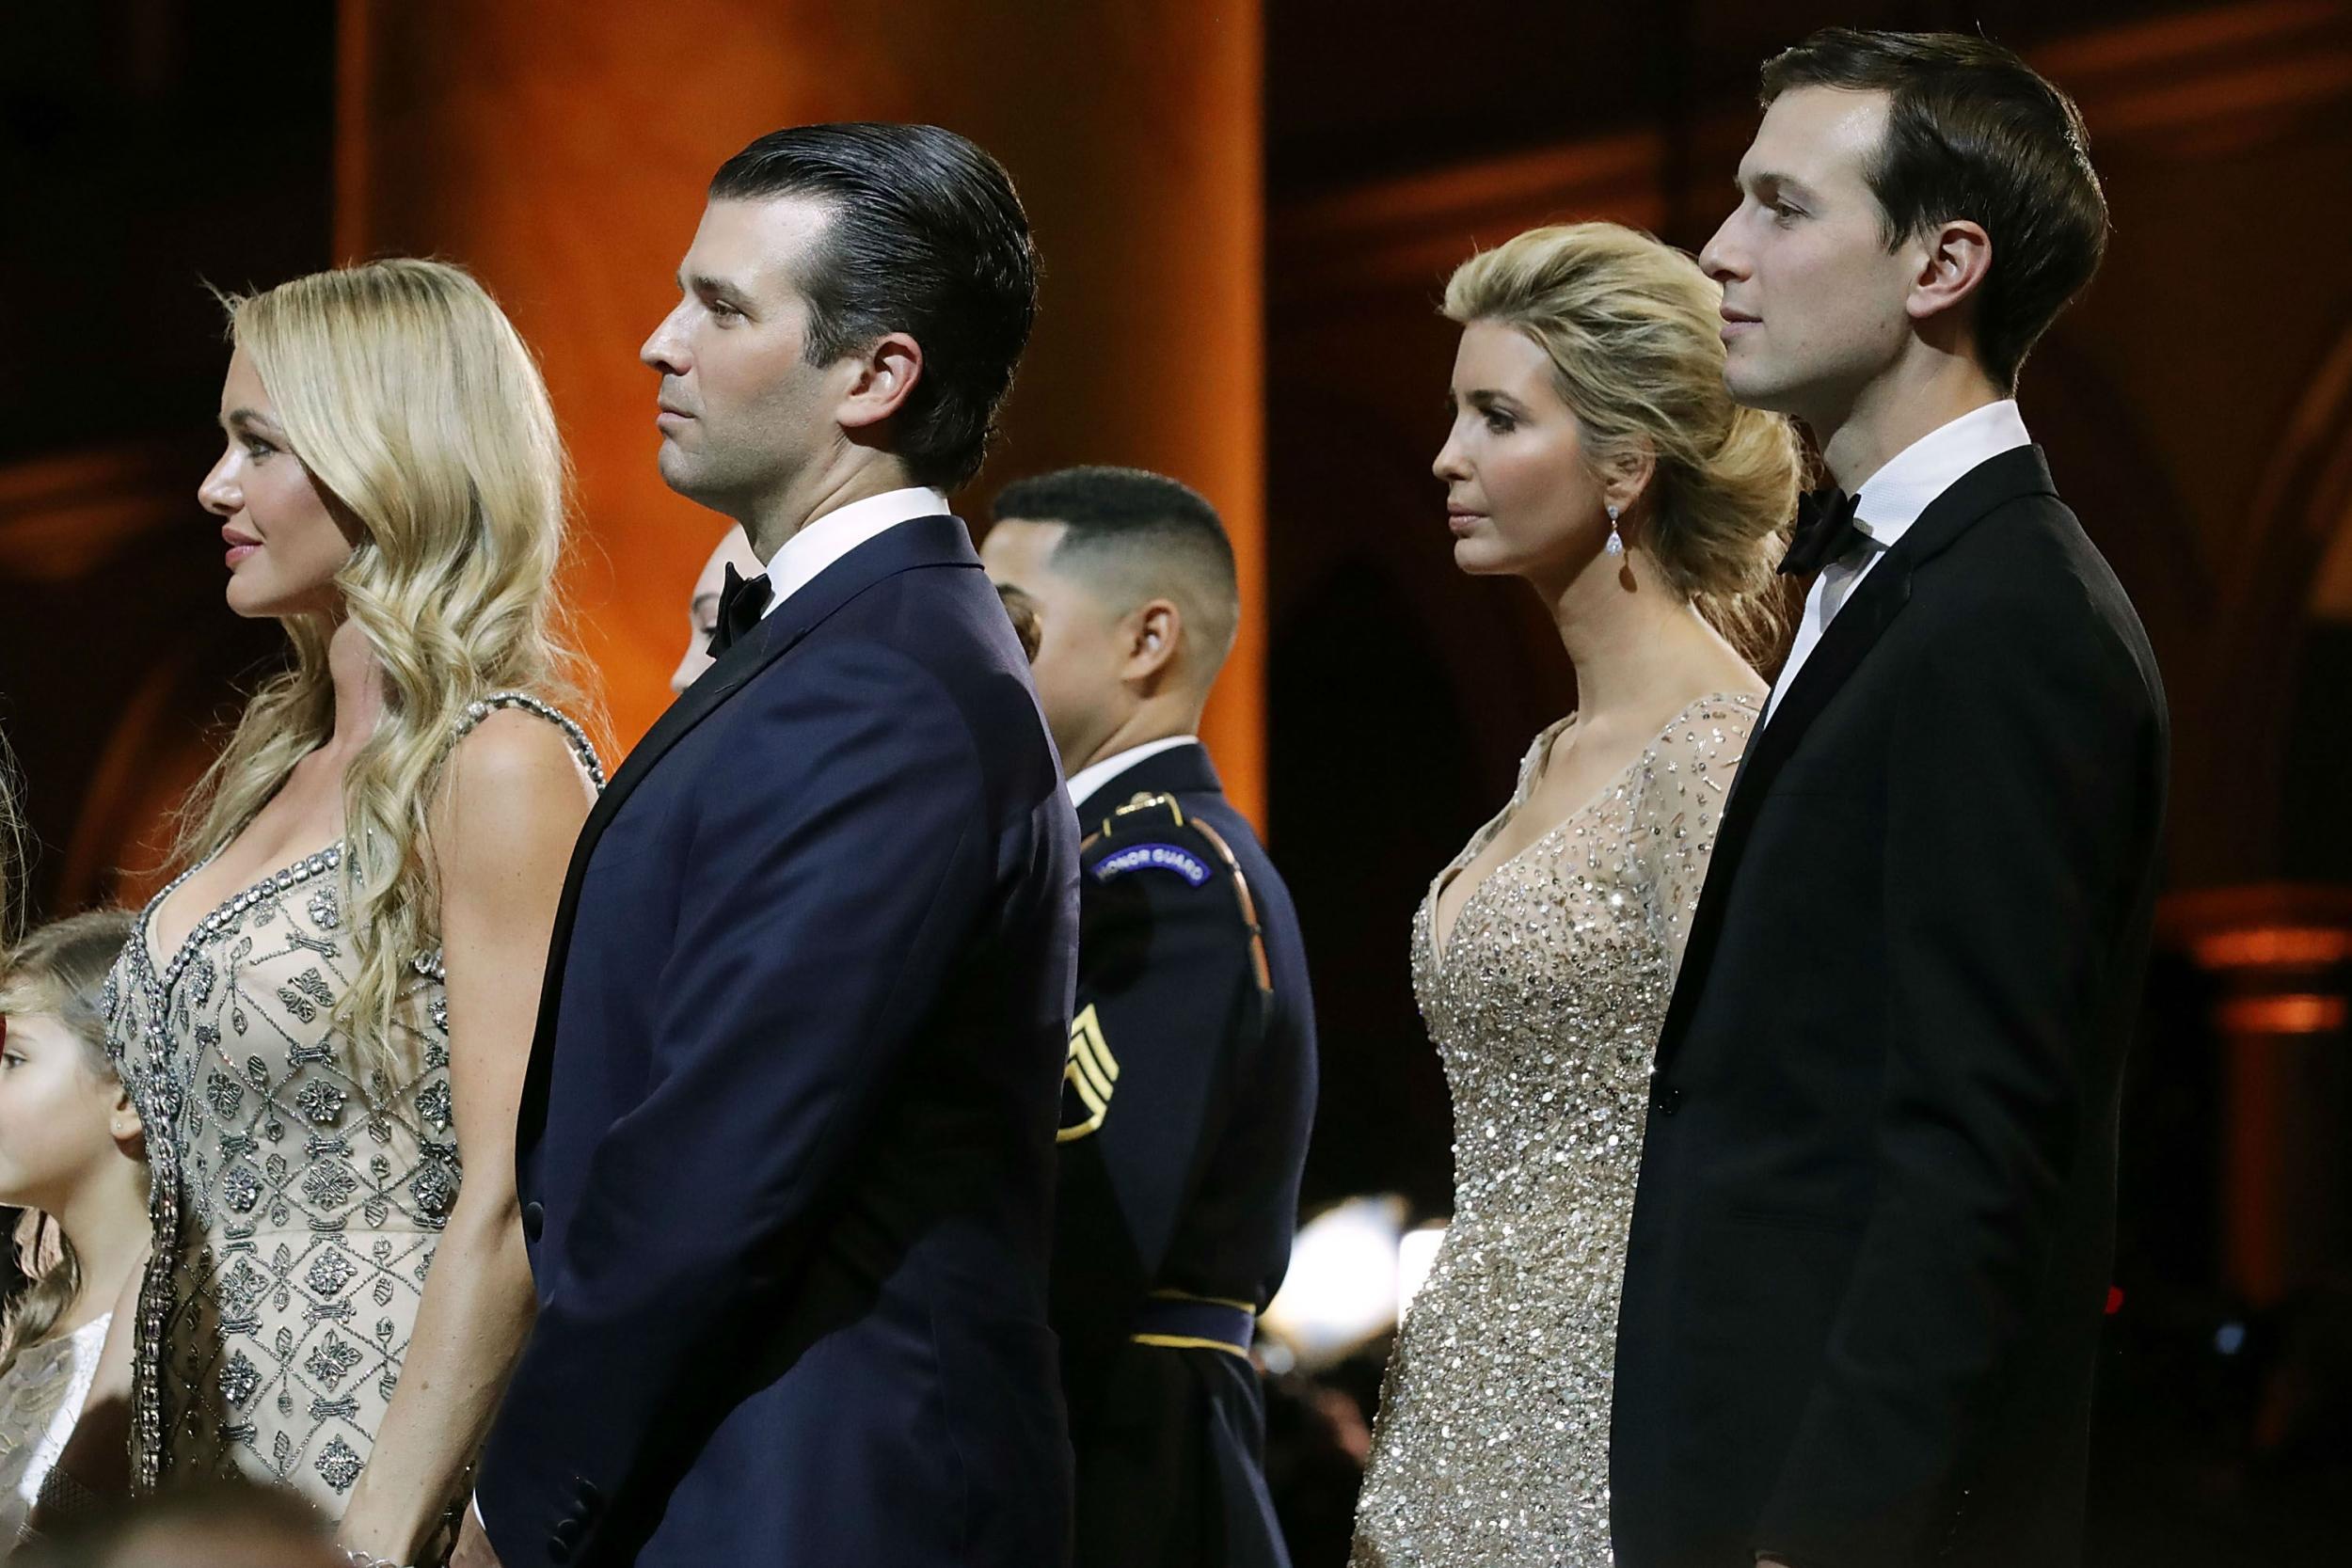 Donald Trump Jr, second left, and Ivanka Trump, second from the right, were being investigated for fraud